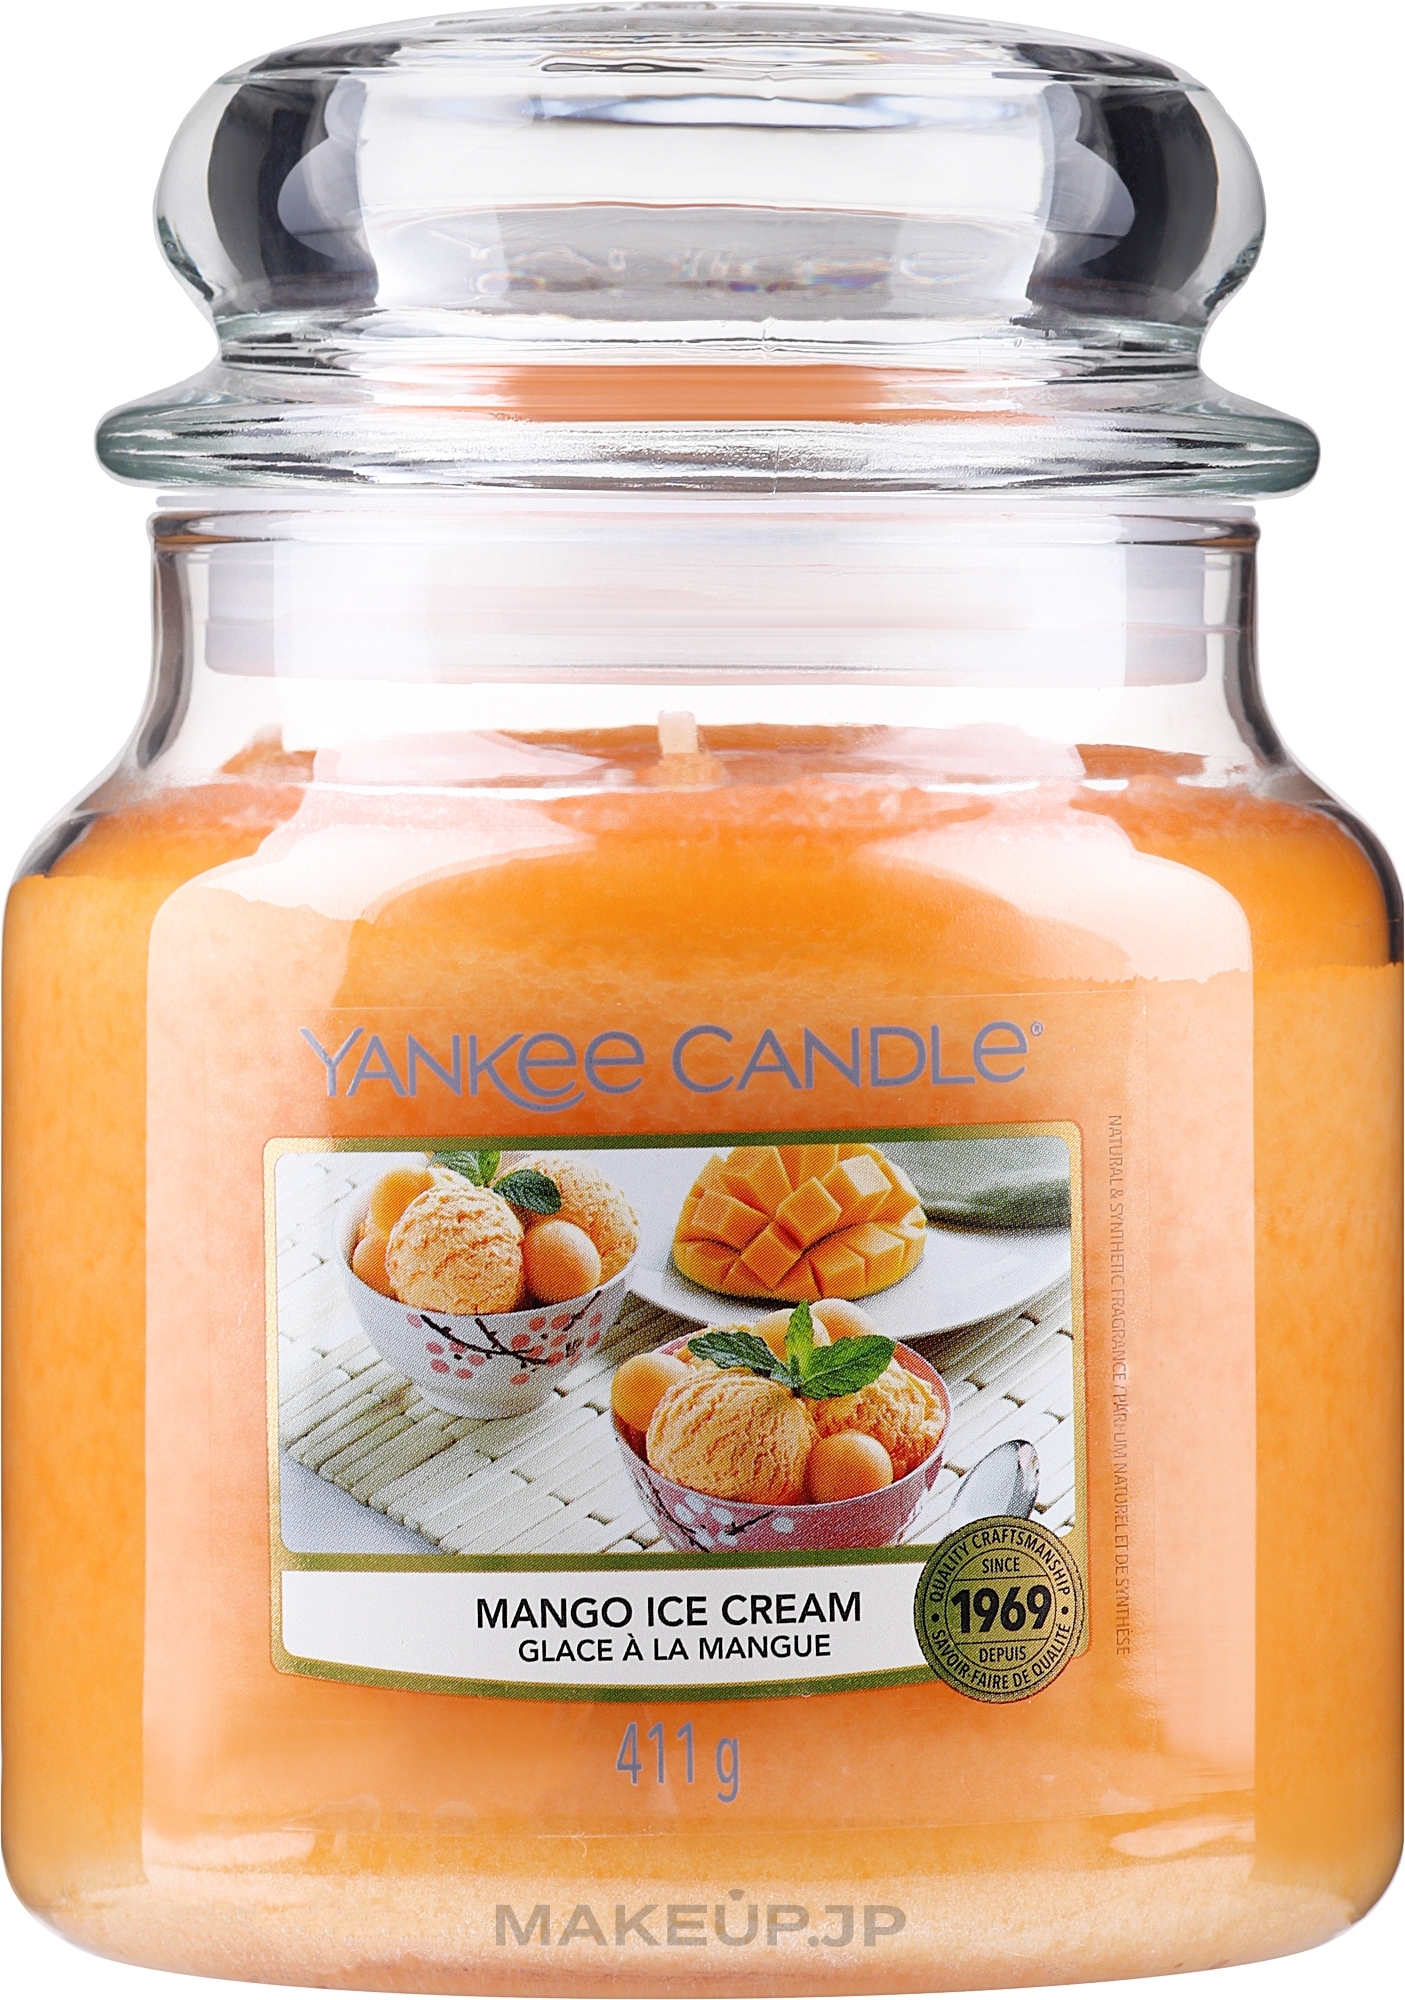 Scented Candle in Jar - Yankee Candle Mango Ice Cream Candle — photo 411 g